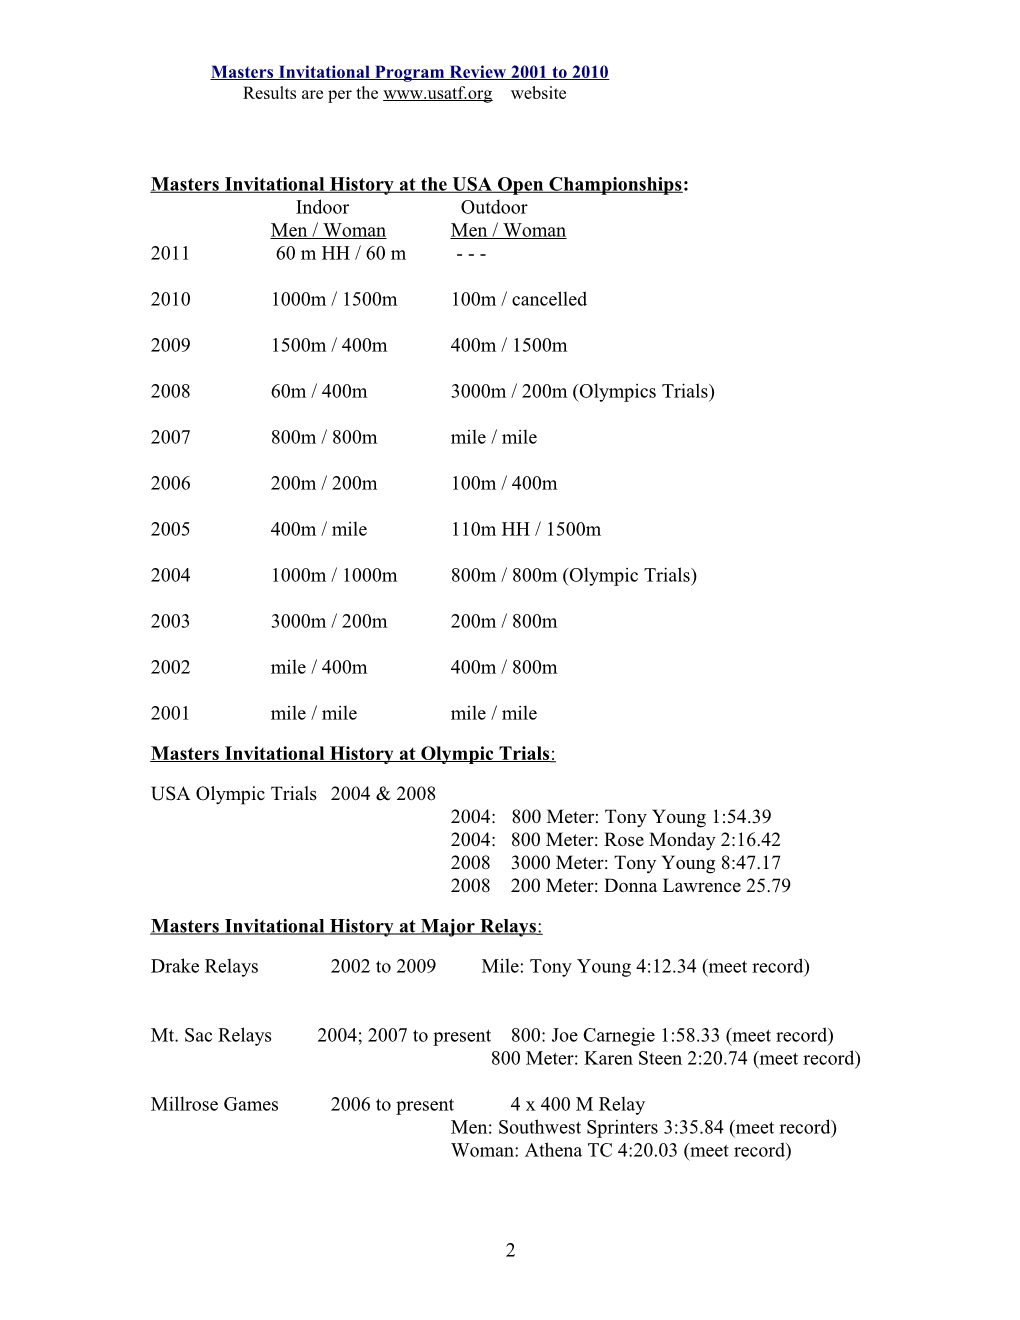 Masters Invitational Program Review 2001 to 2010